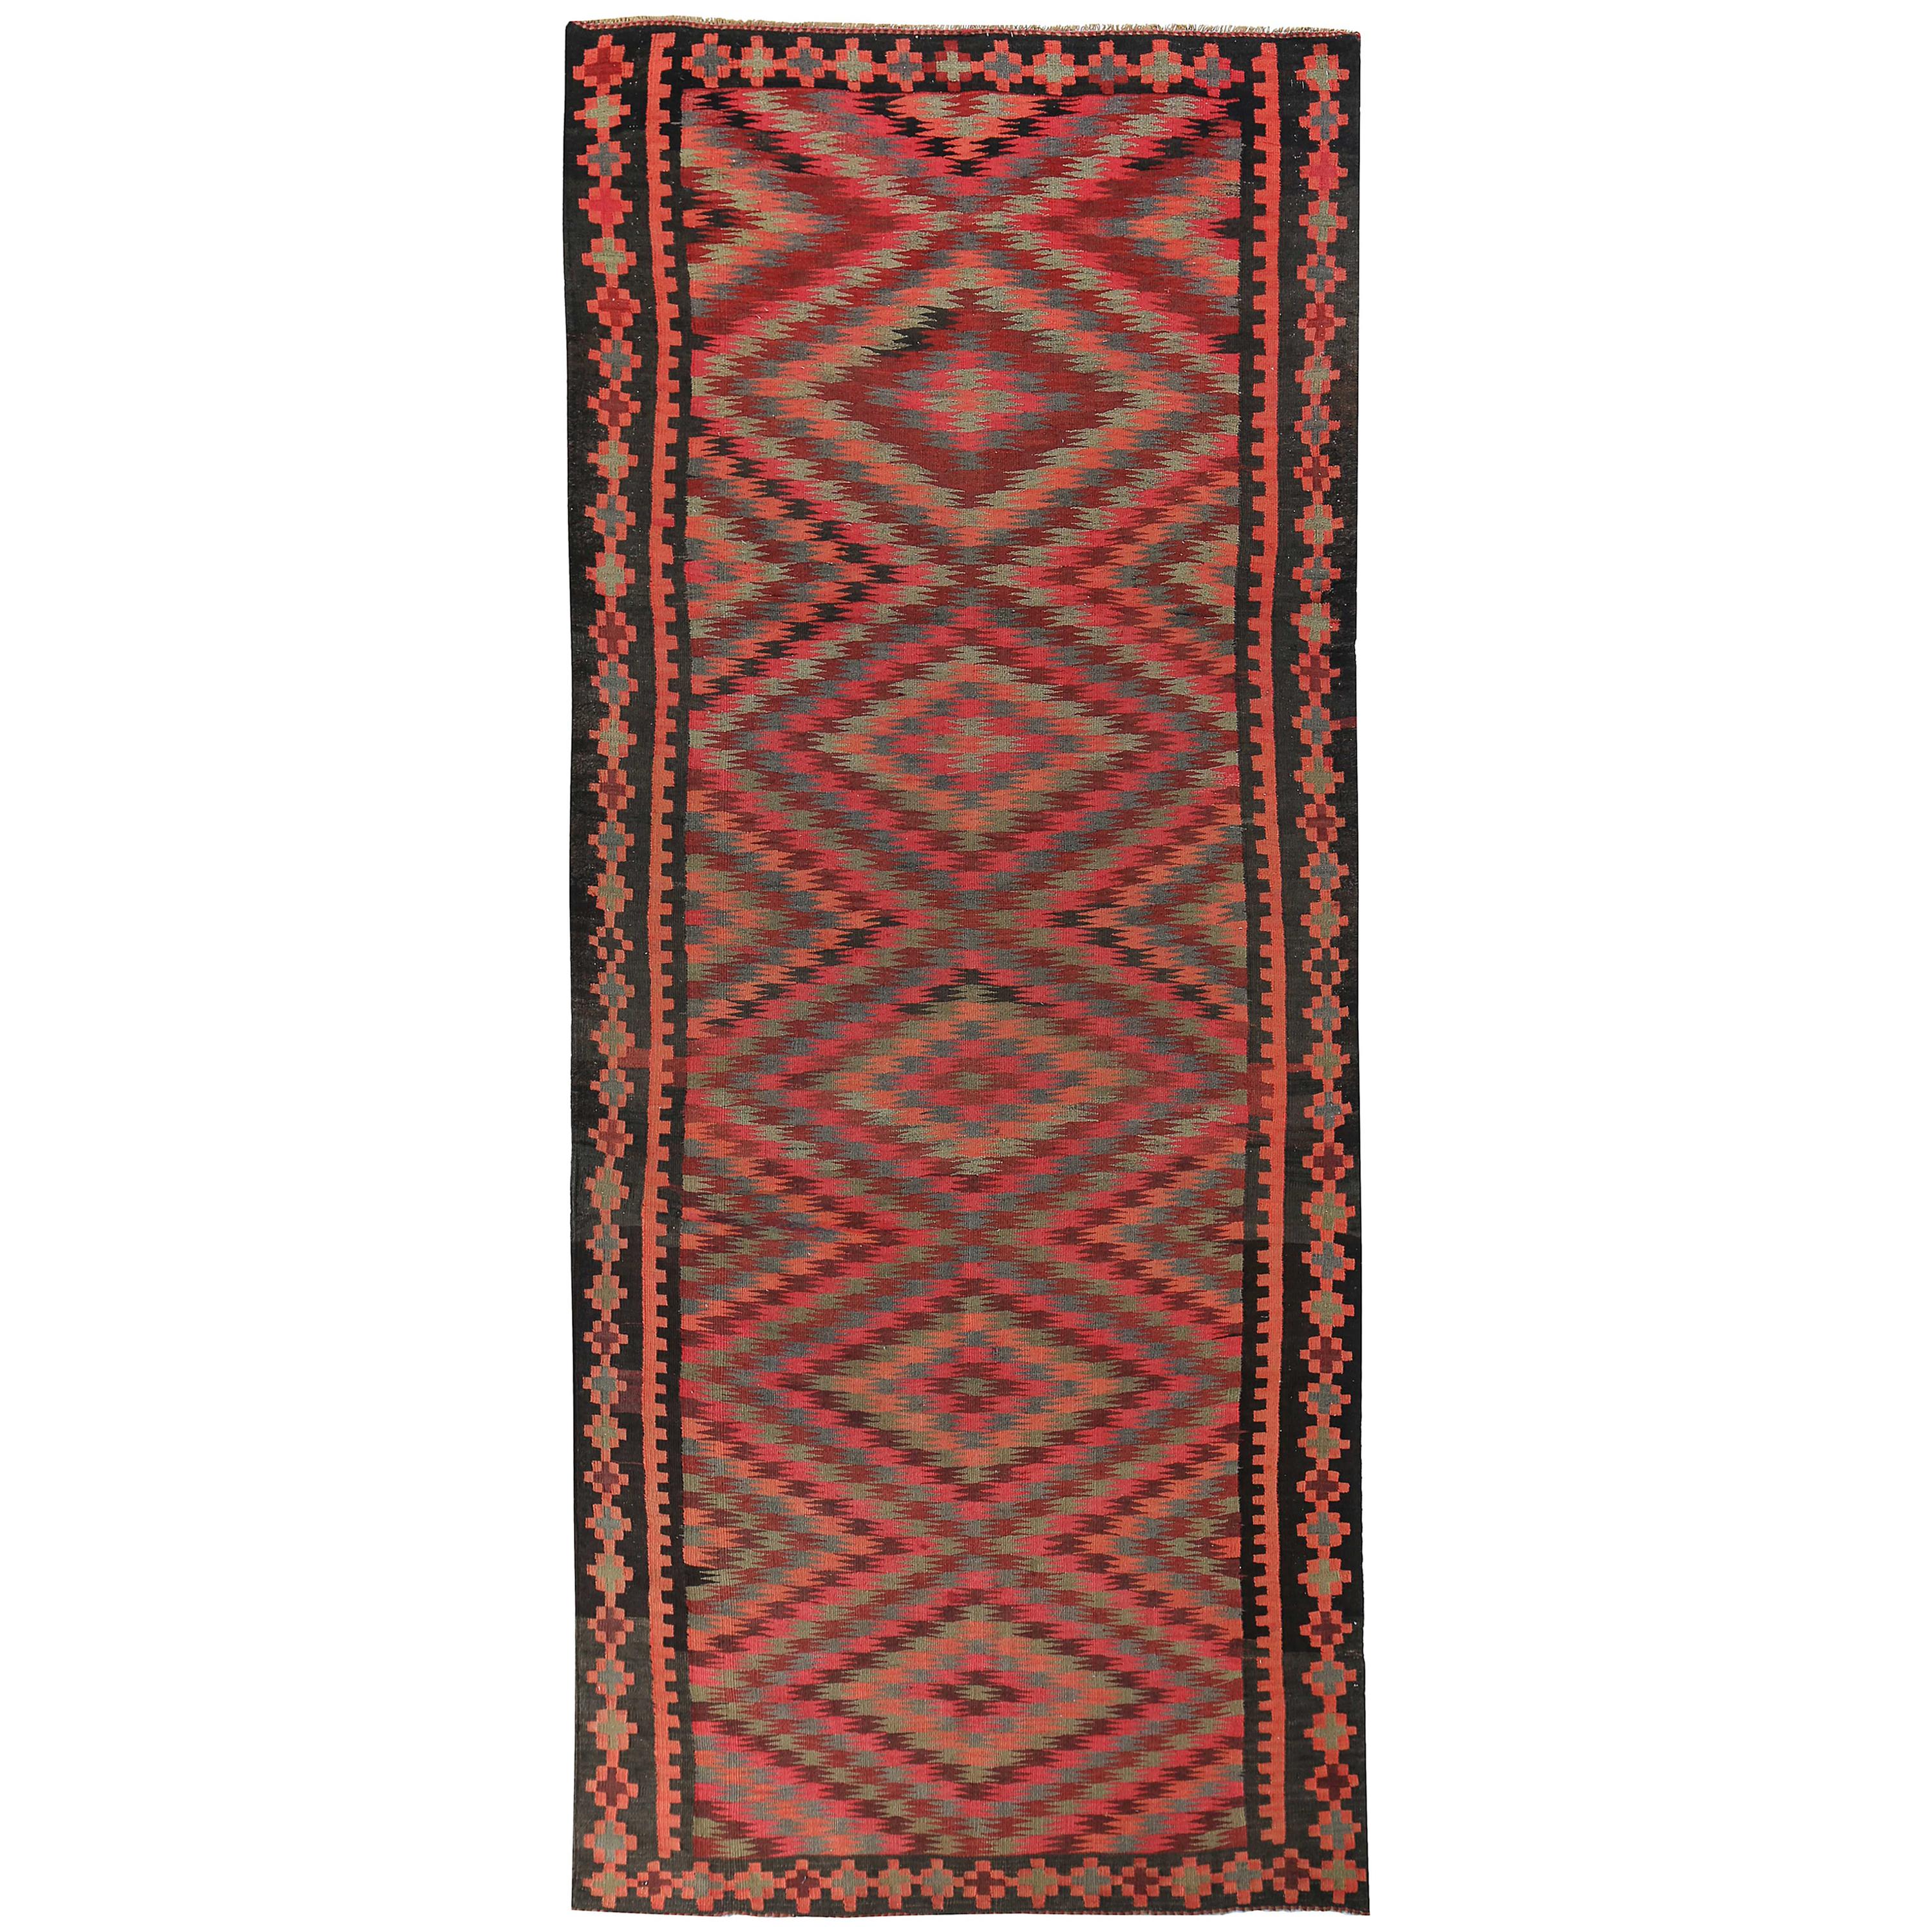 Turkish Kilim Runner Rug with Green and Pink Tribal Details on Black Field